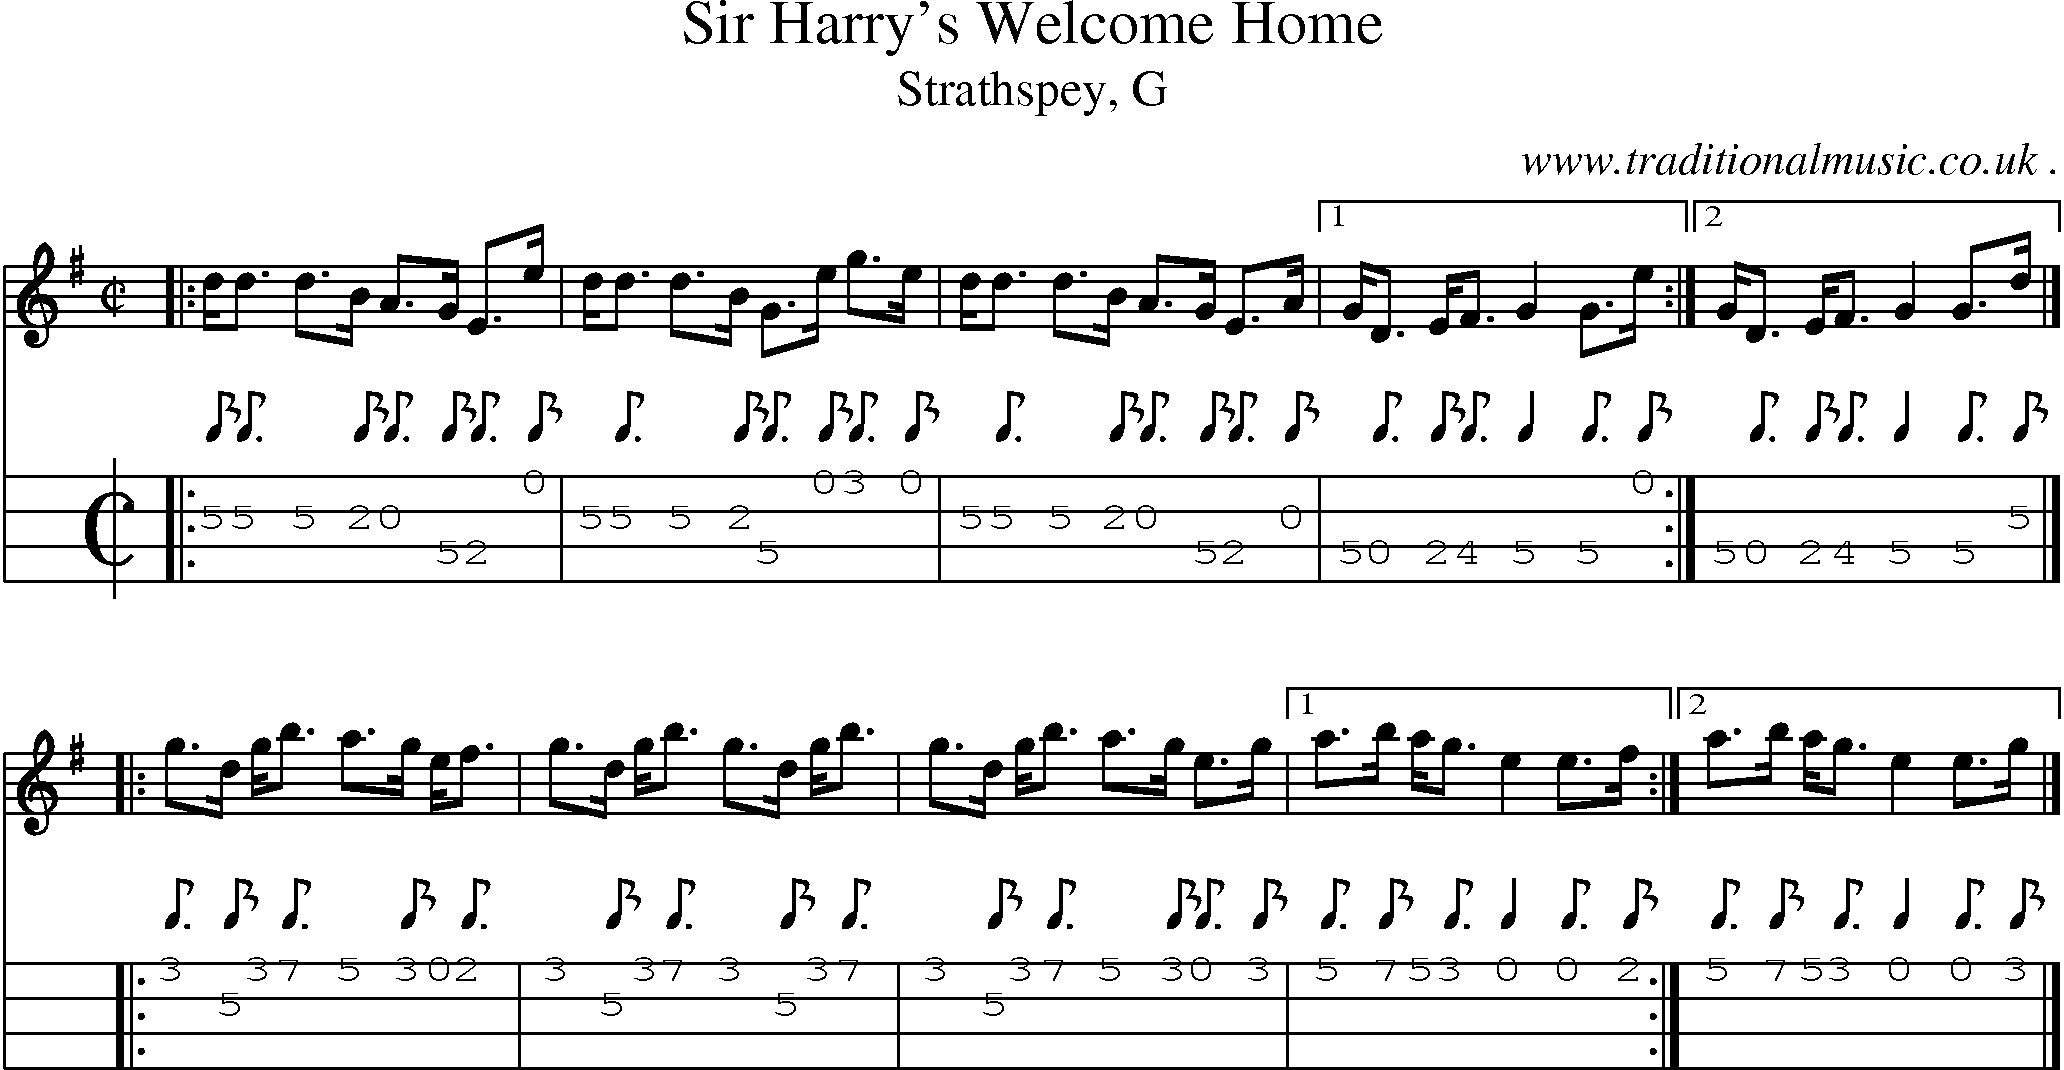 Sheet-music  score, Chords and Mandolin Tabs for Sir Harrys Welcome Home